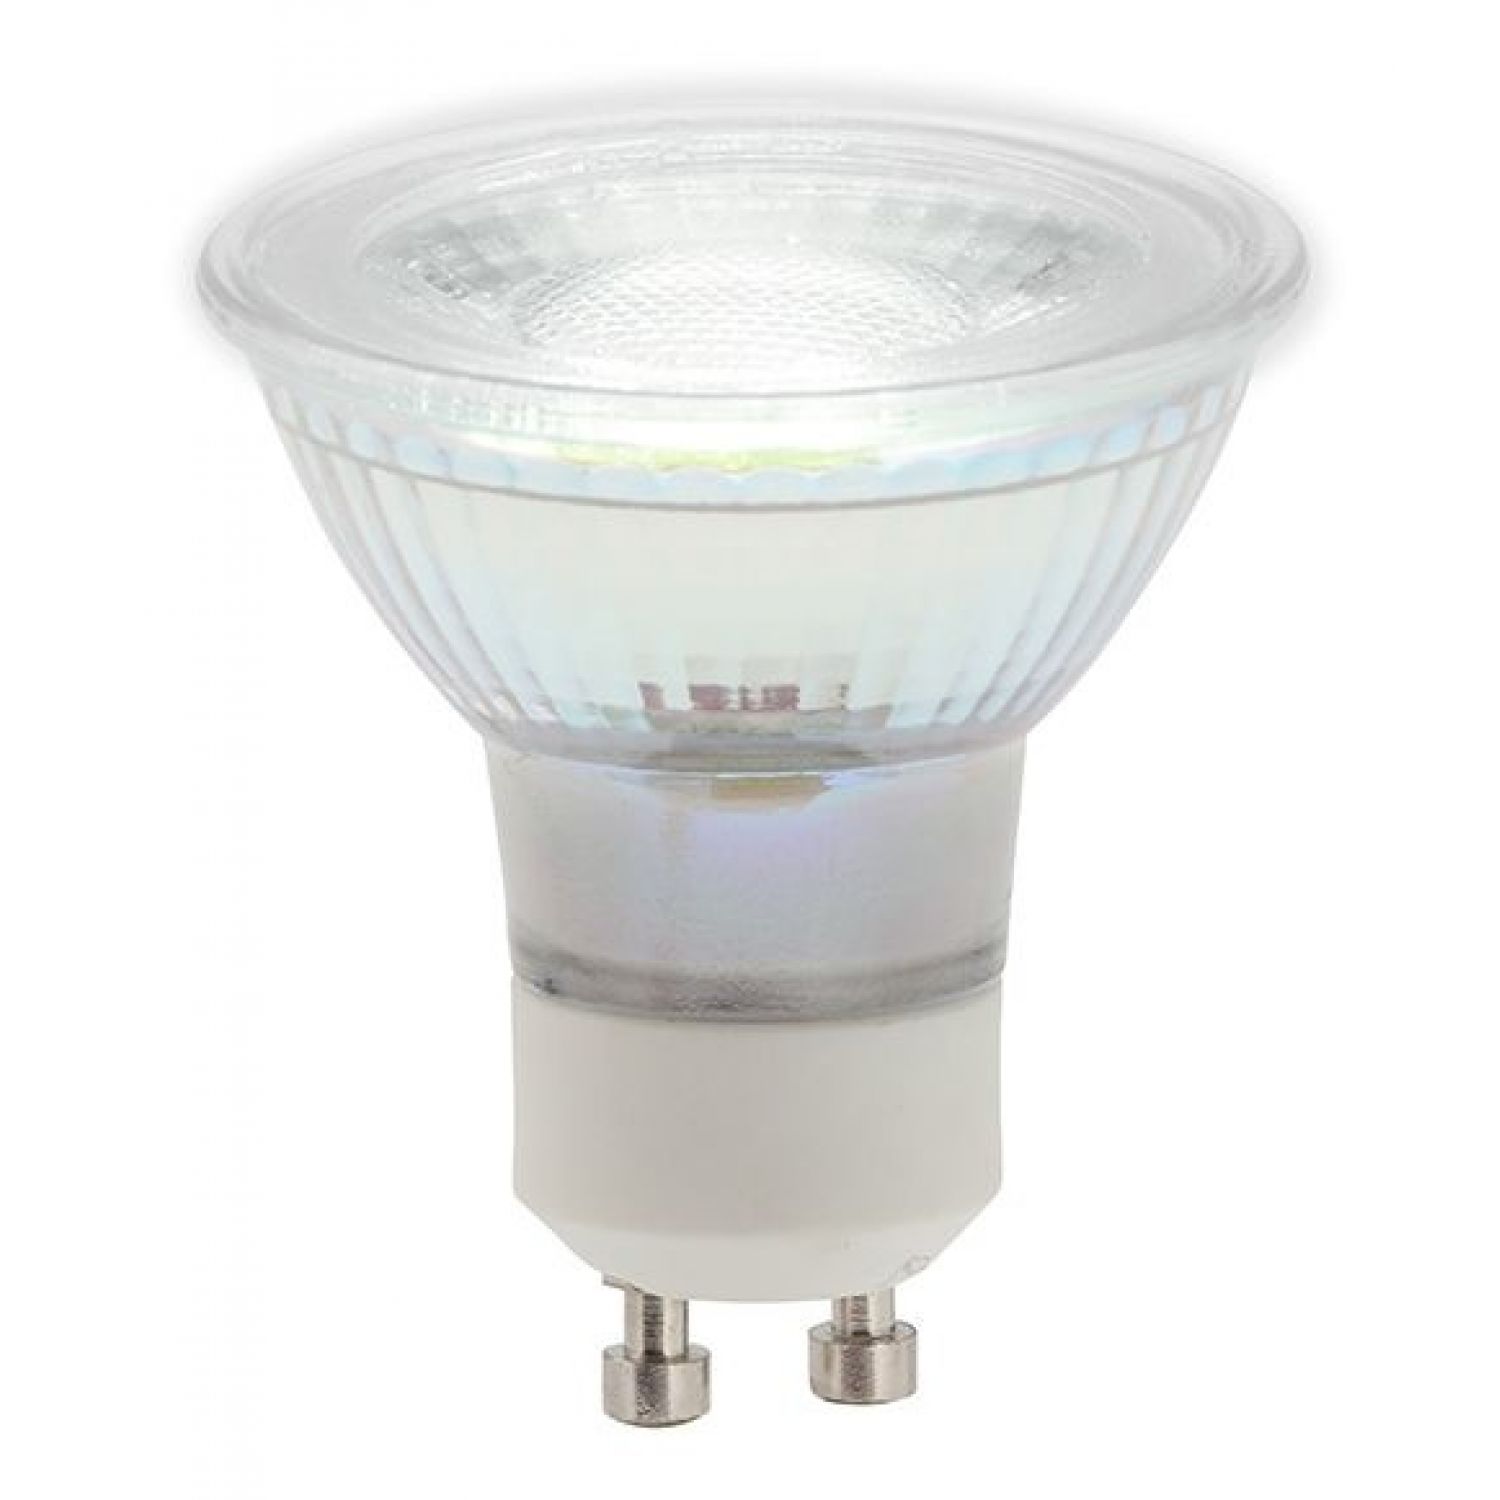 InLight INL-34151-4K: 5w LED GU10 Bulb, 4000K, glass, dimmable, 400lm, 320°  beam - from